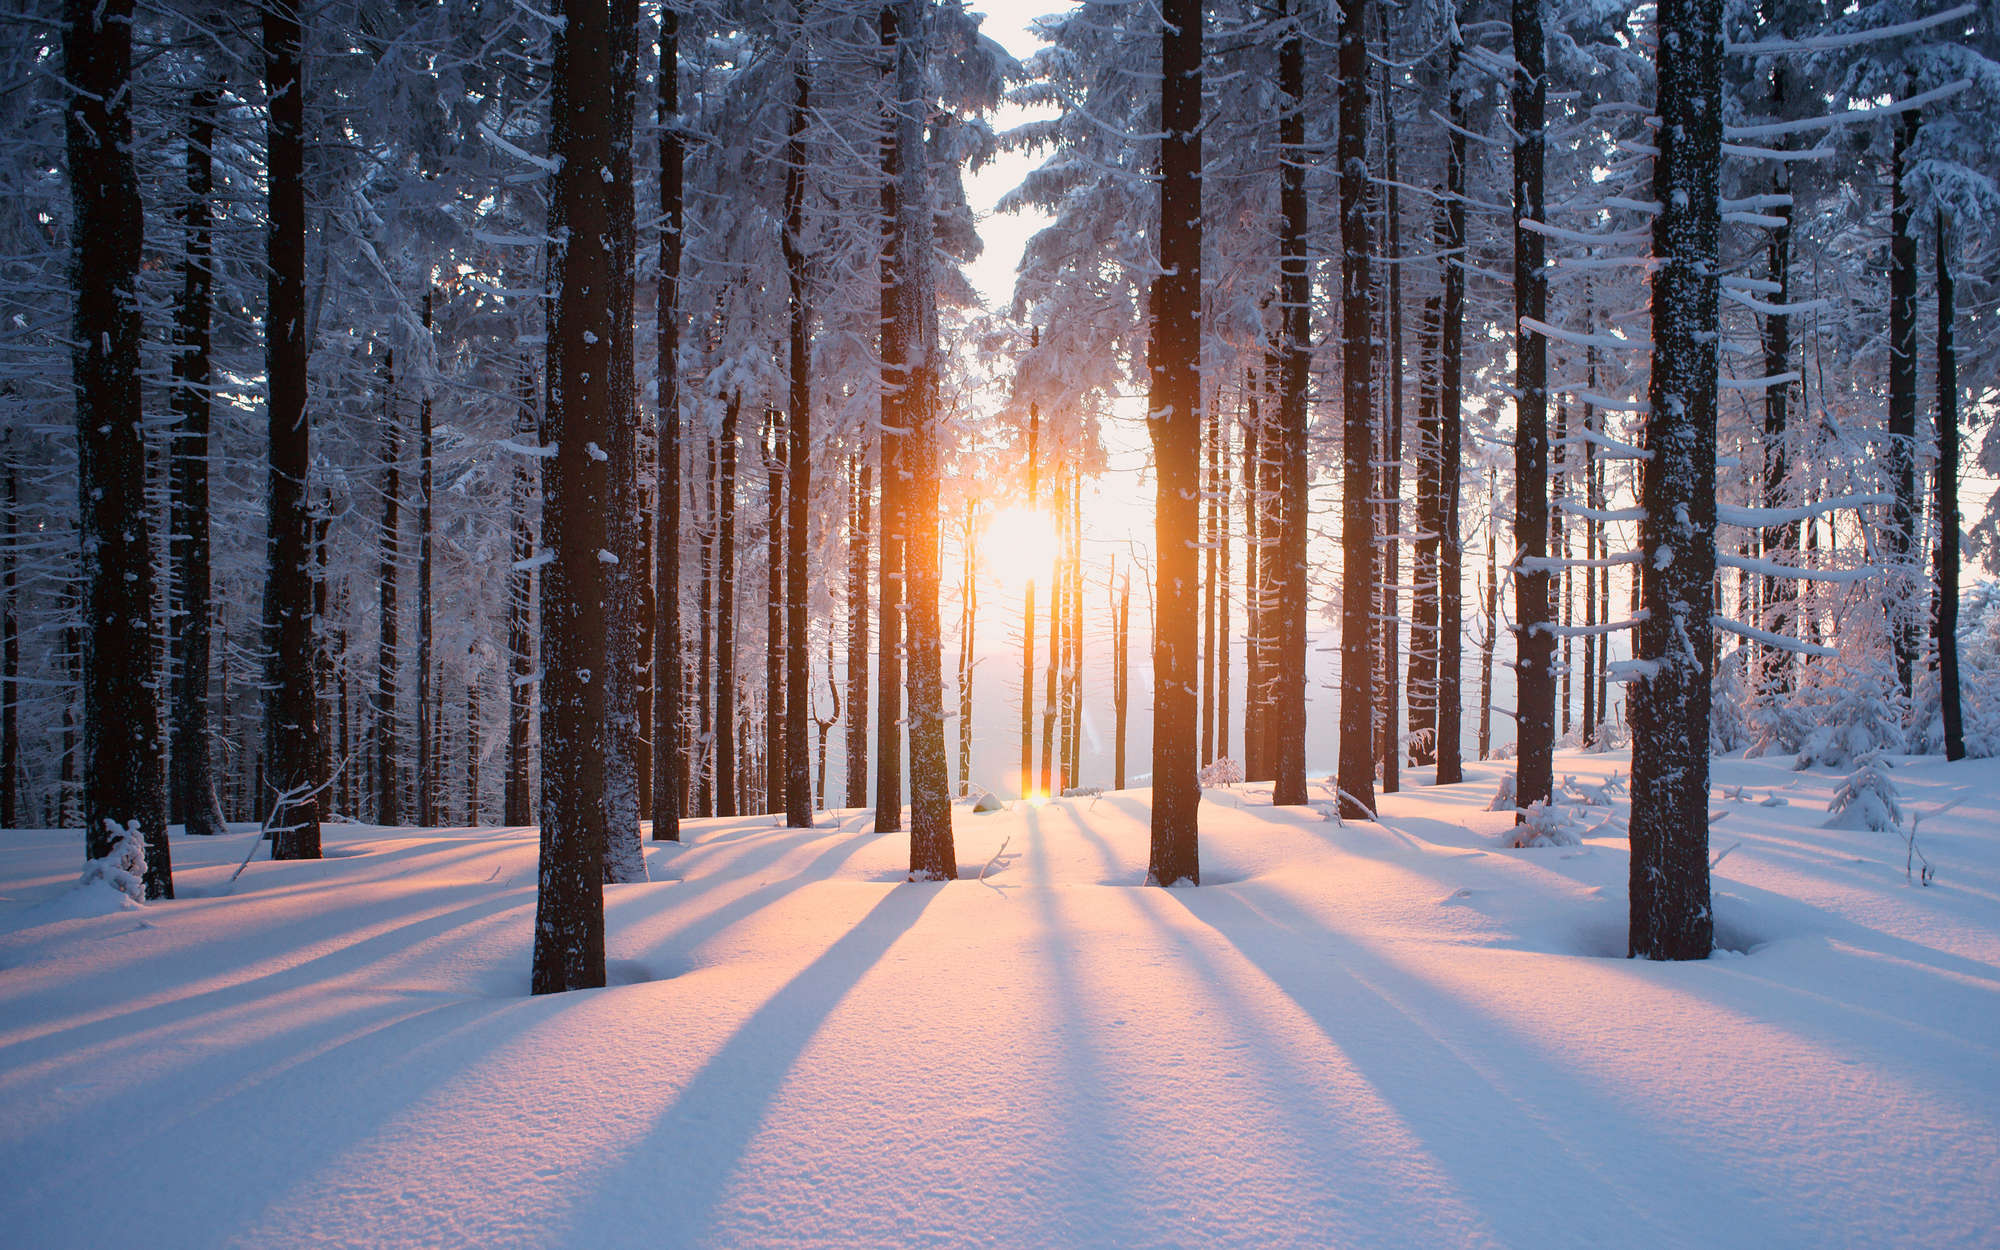             Photo wallpaper Snow in the Winter Forest - Premium Smooth Non-woven
        